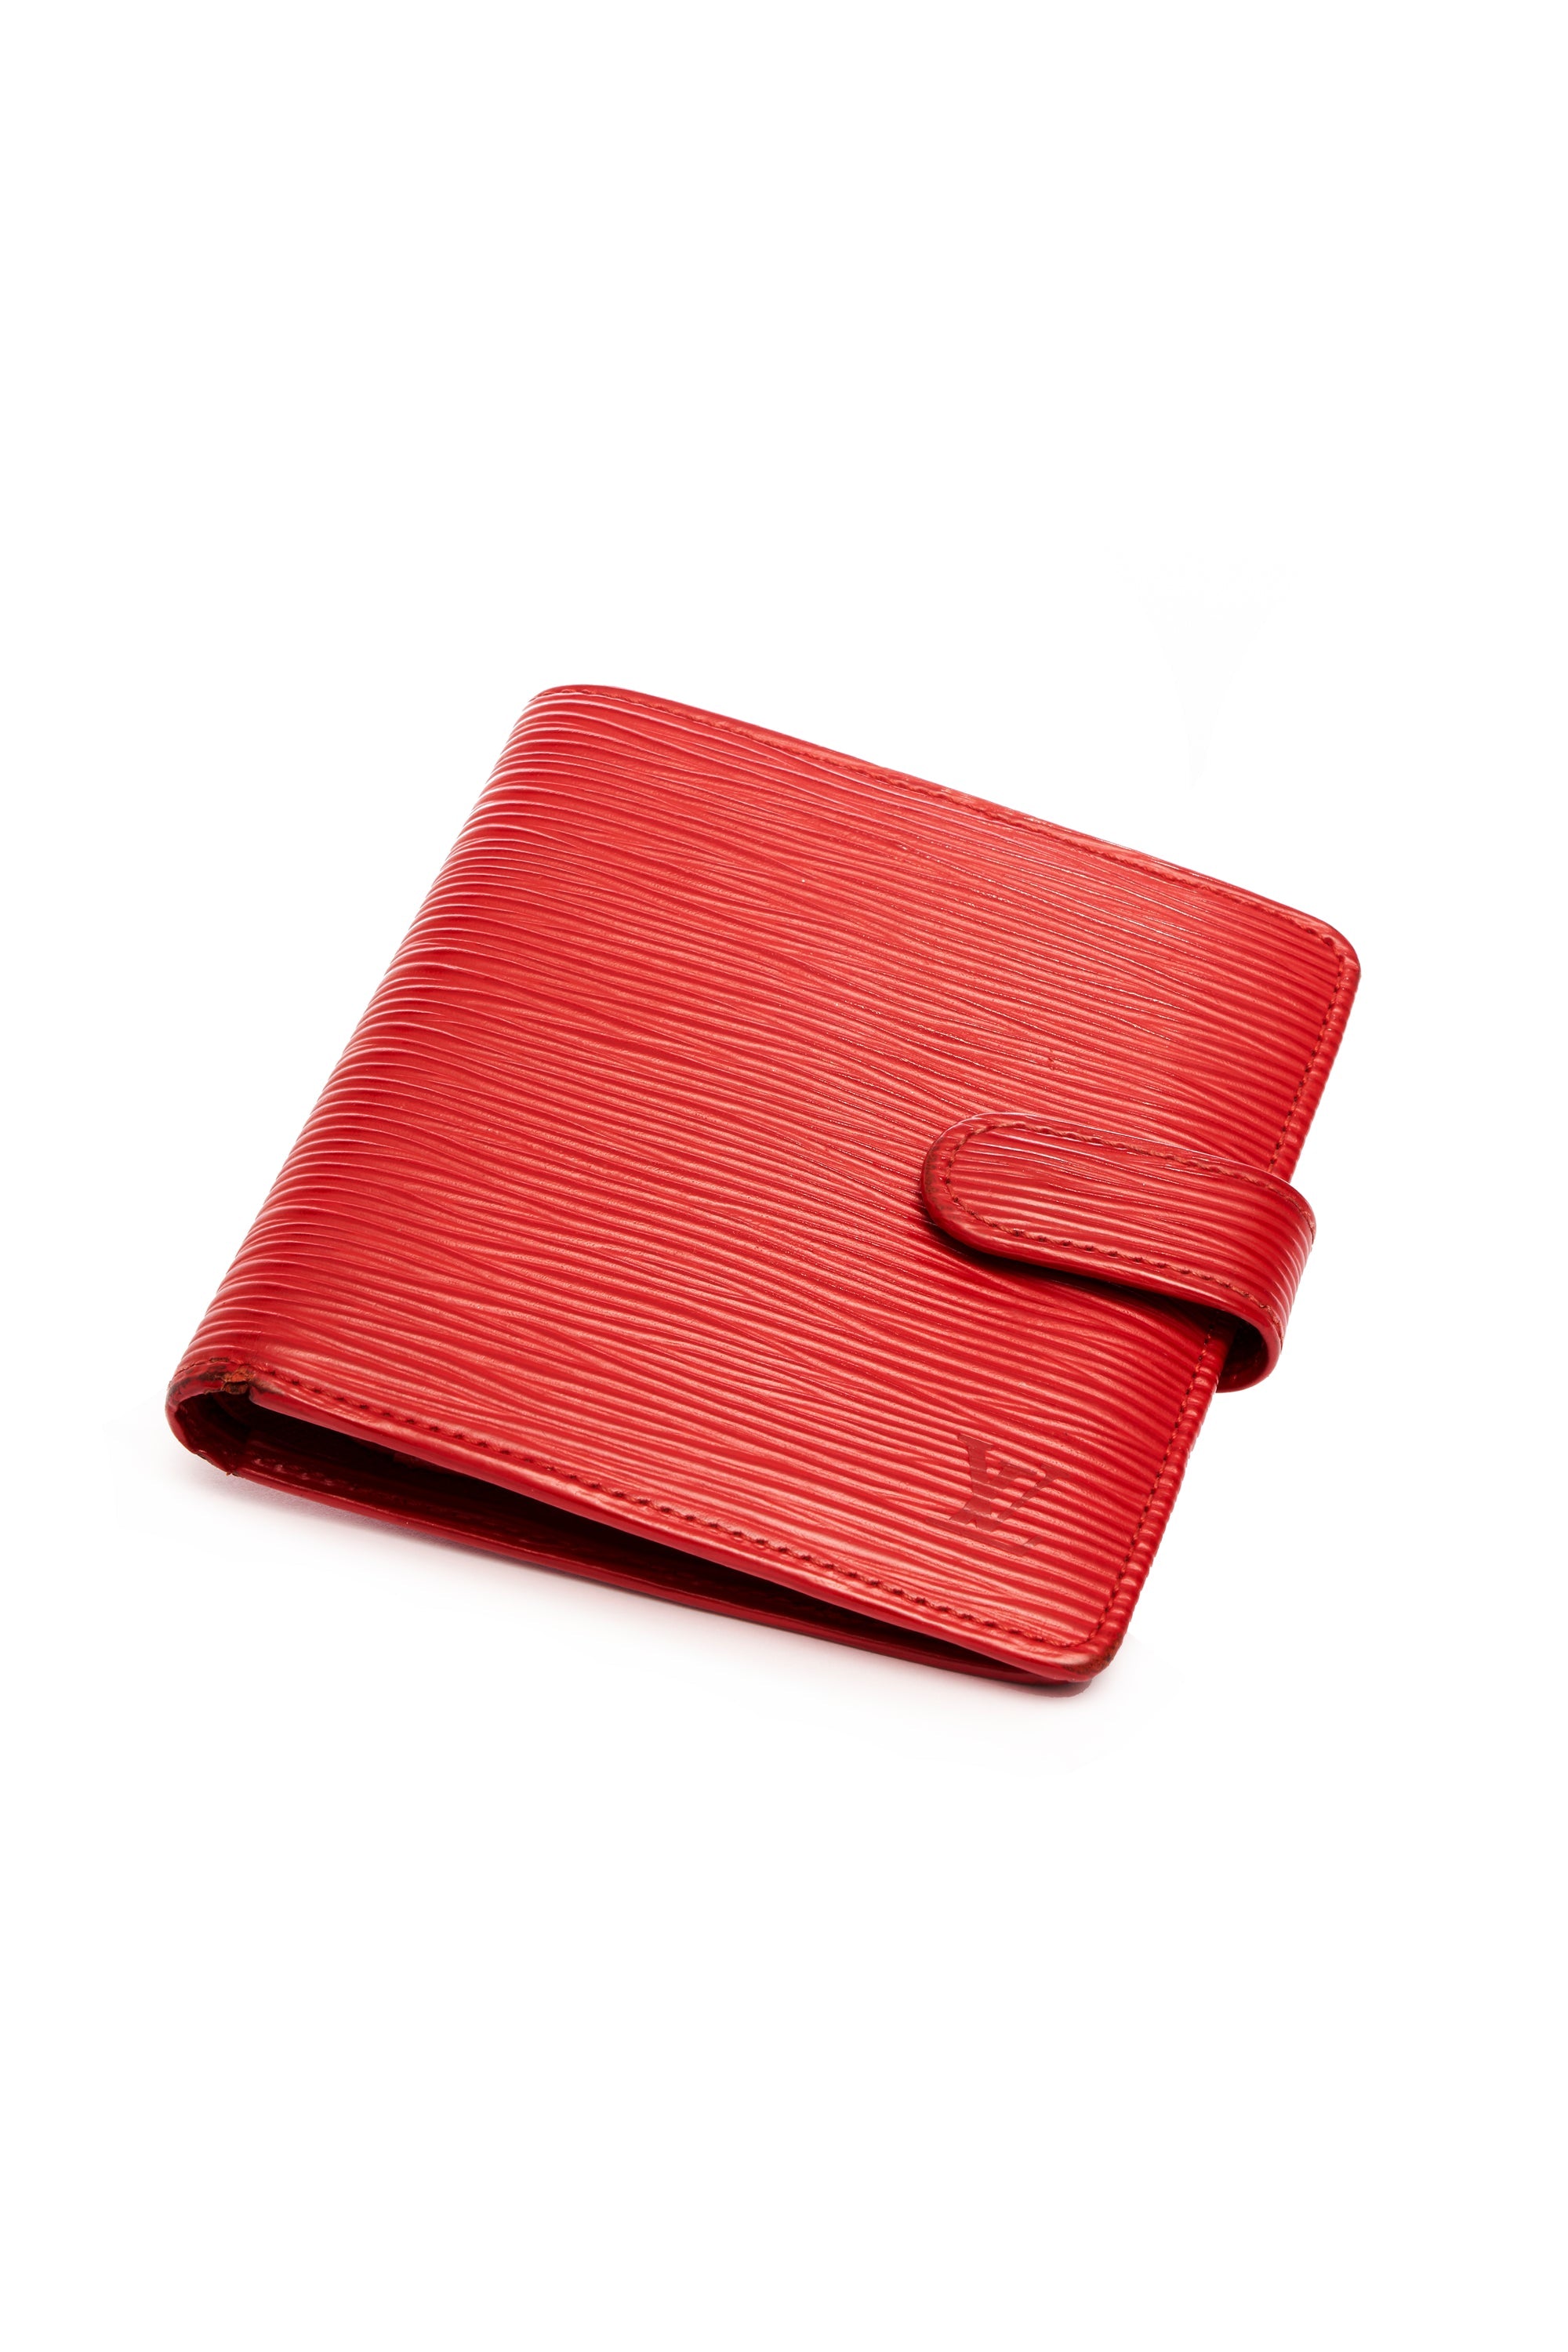 Louis Vuitton Small Red Epi Snap Leather Wallet